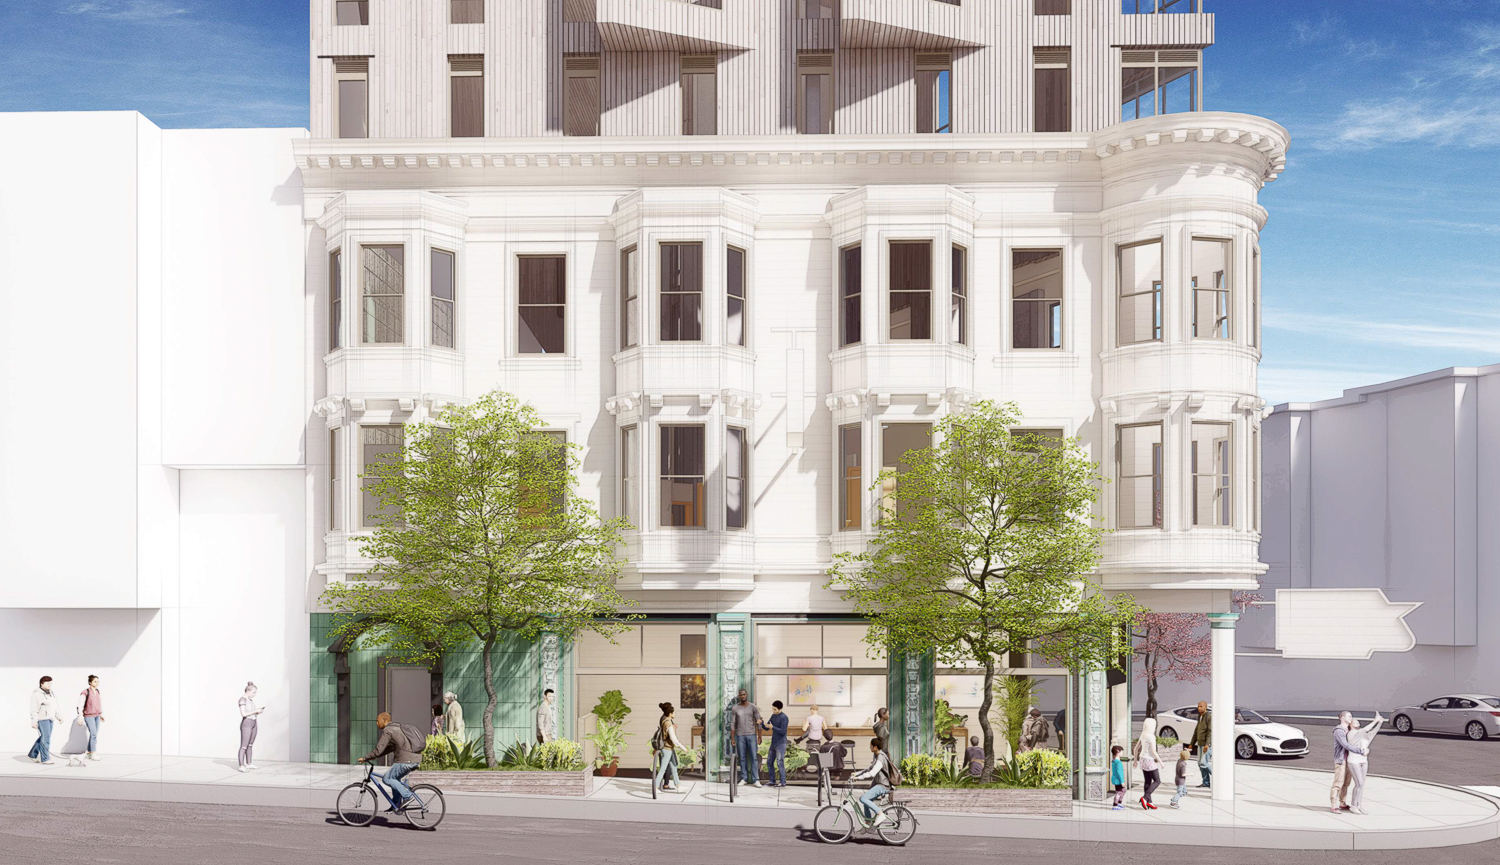 3300 Mission Street existing building details, rendering by BAR Architects